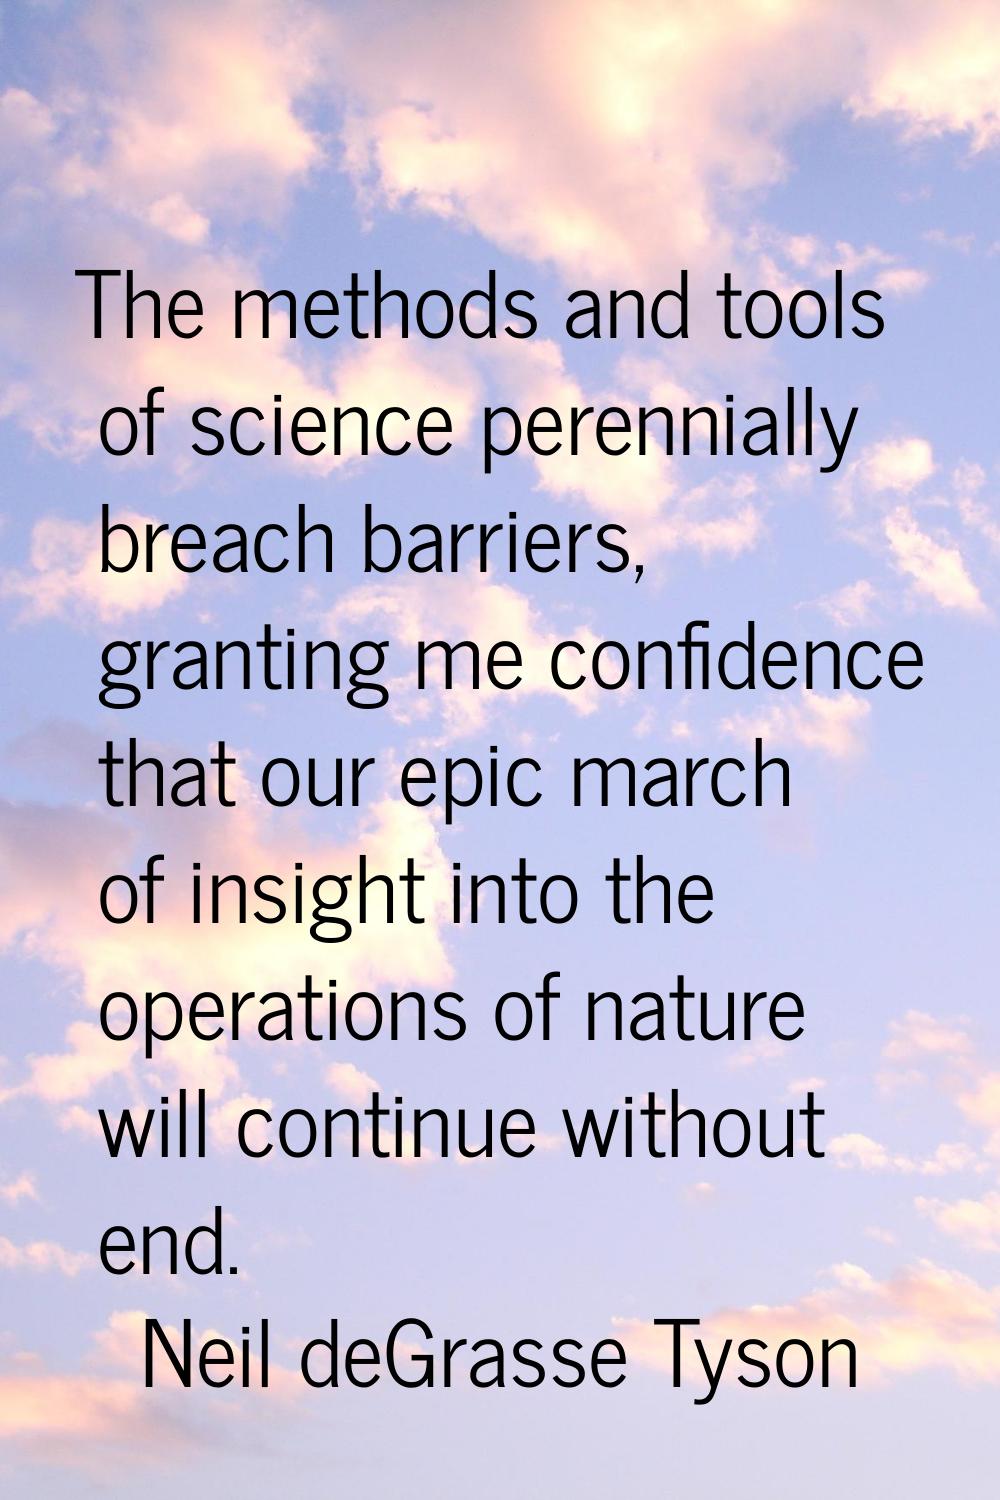 The methods and tools of science perennially breach barriers, granting me confidence that our epic 